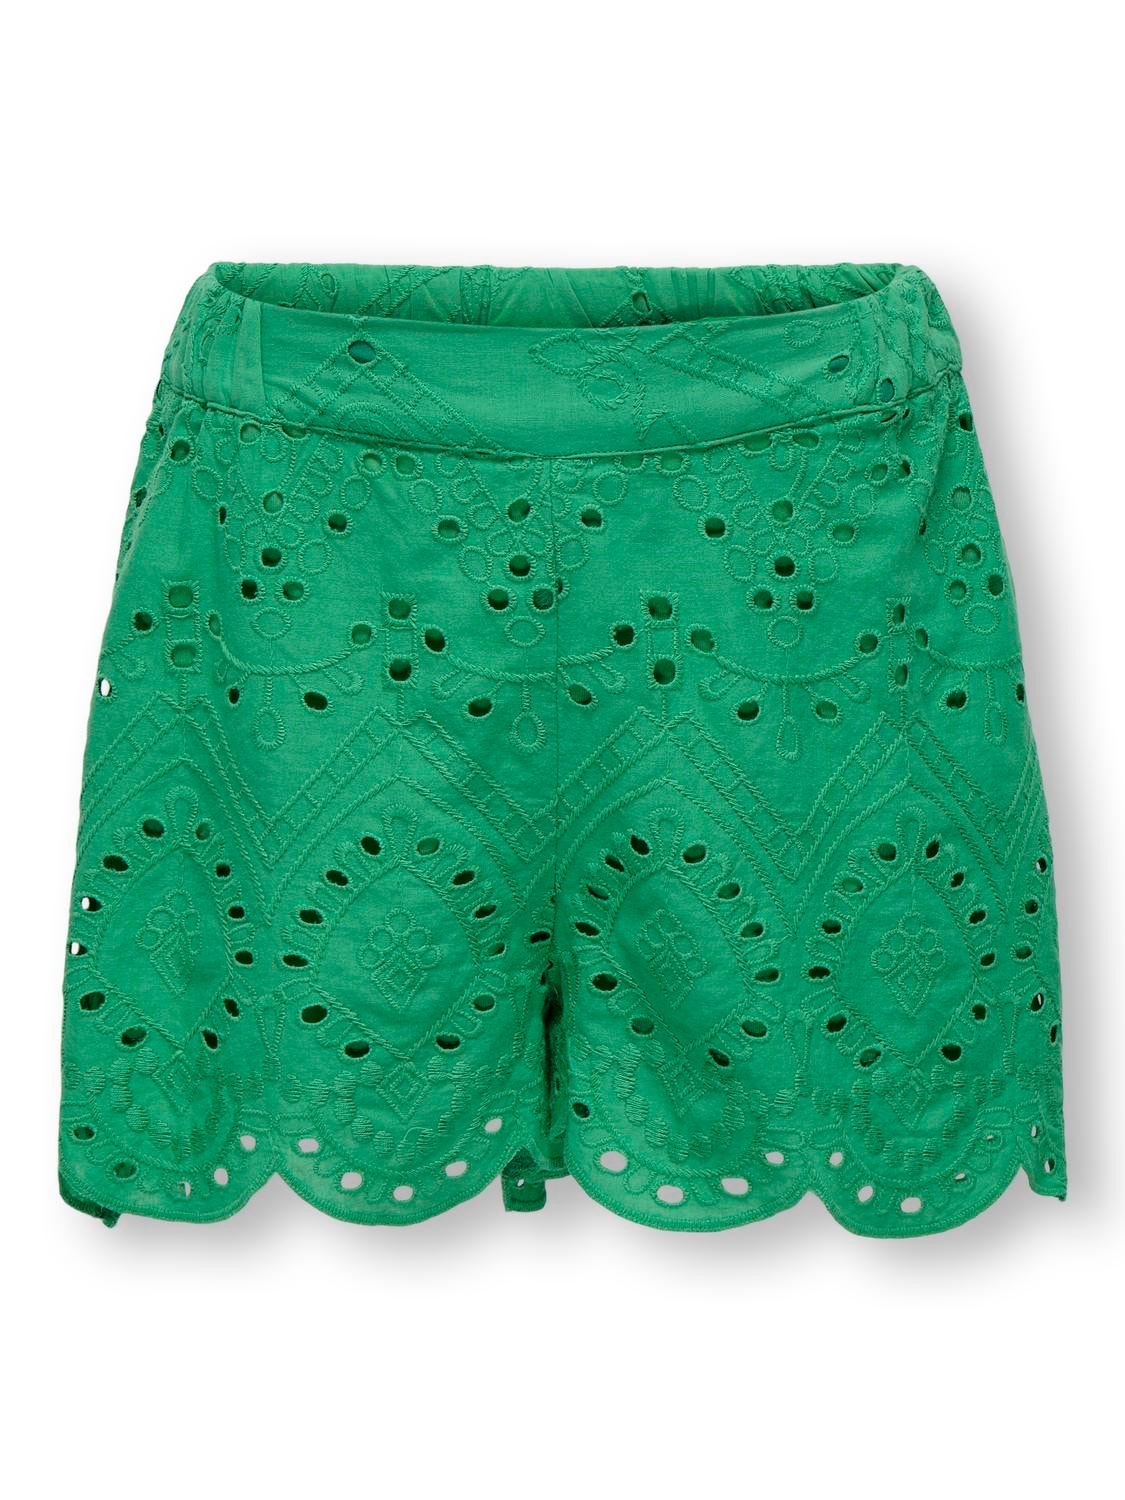 ONLY Normal passform Shorts -Deep Mint - 15320399